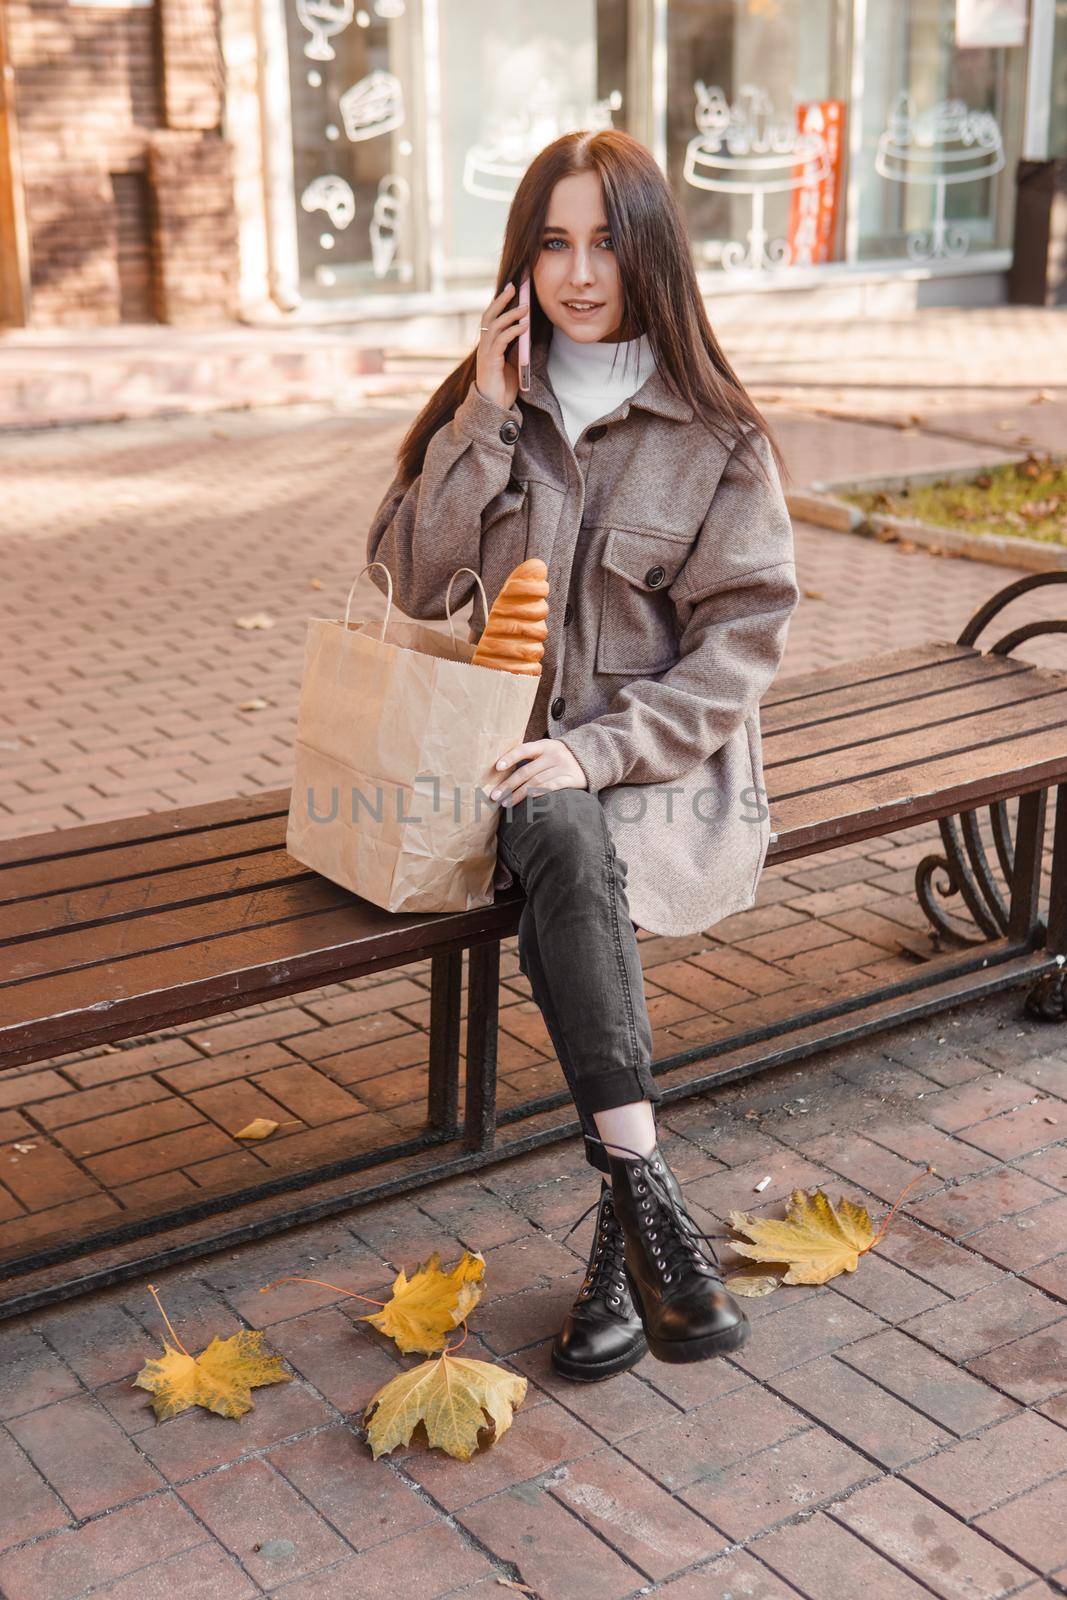 A stylish brunette woman walks around the autumn city. The brunette is sitting on a bench outside with a glass of coffee and a phone, holding a craft bag with a baguette.